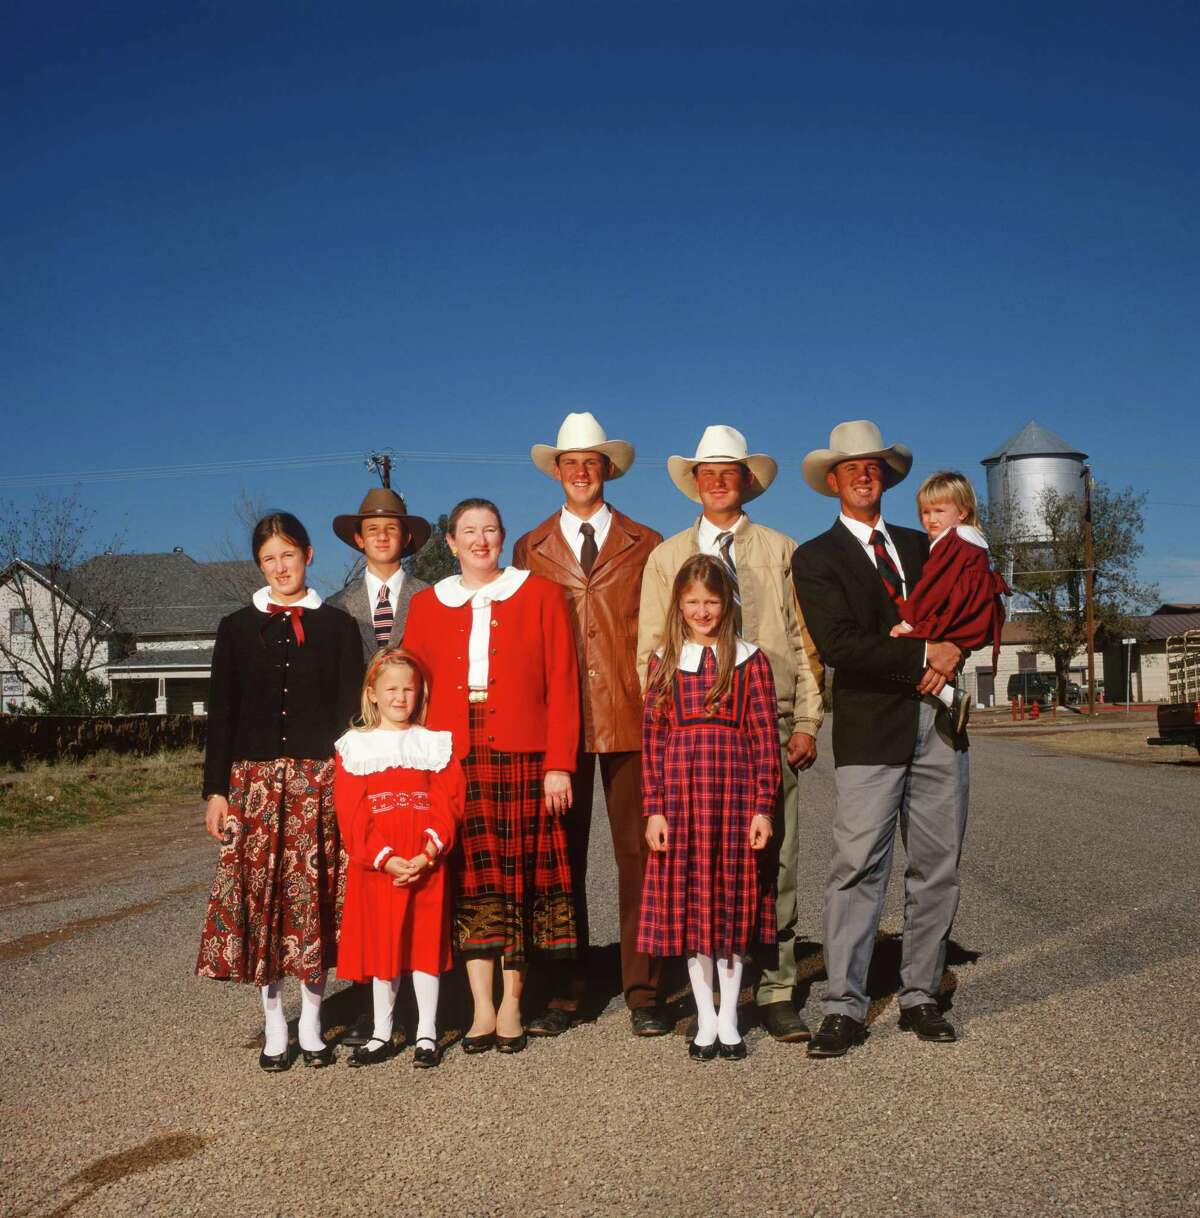 The Largent Family, Van Horn 1998 Photographs by Michael O’Brien from "...